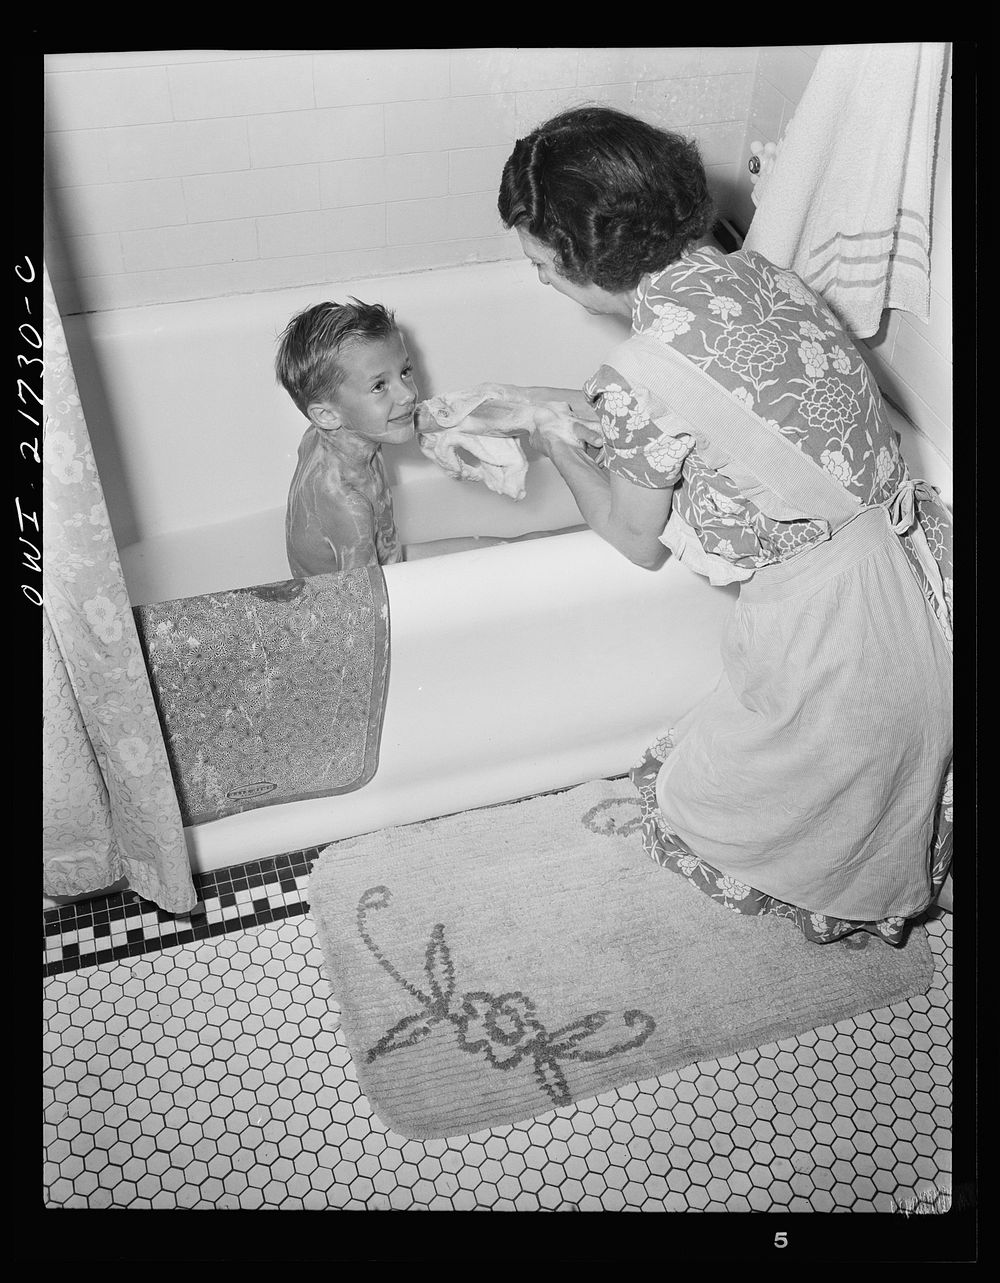 Rochester, New York. Earl Babcock's mother helping with his bath. Sourced from the Library of Congress.